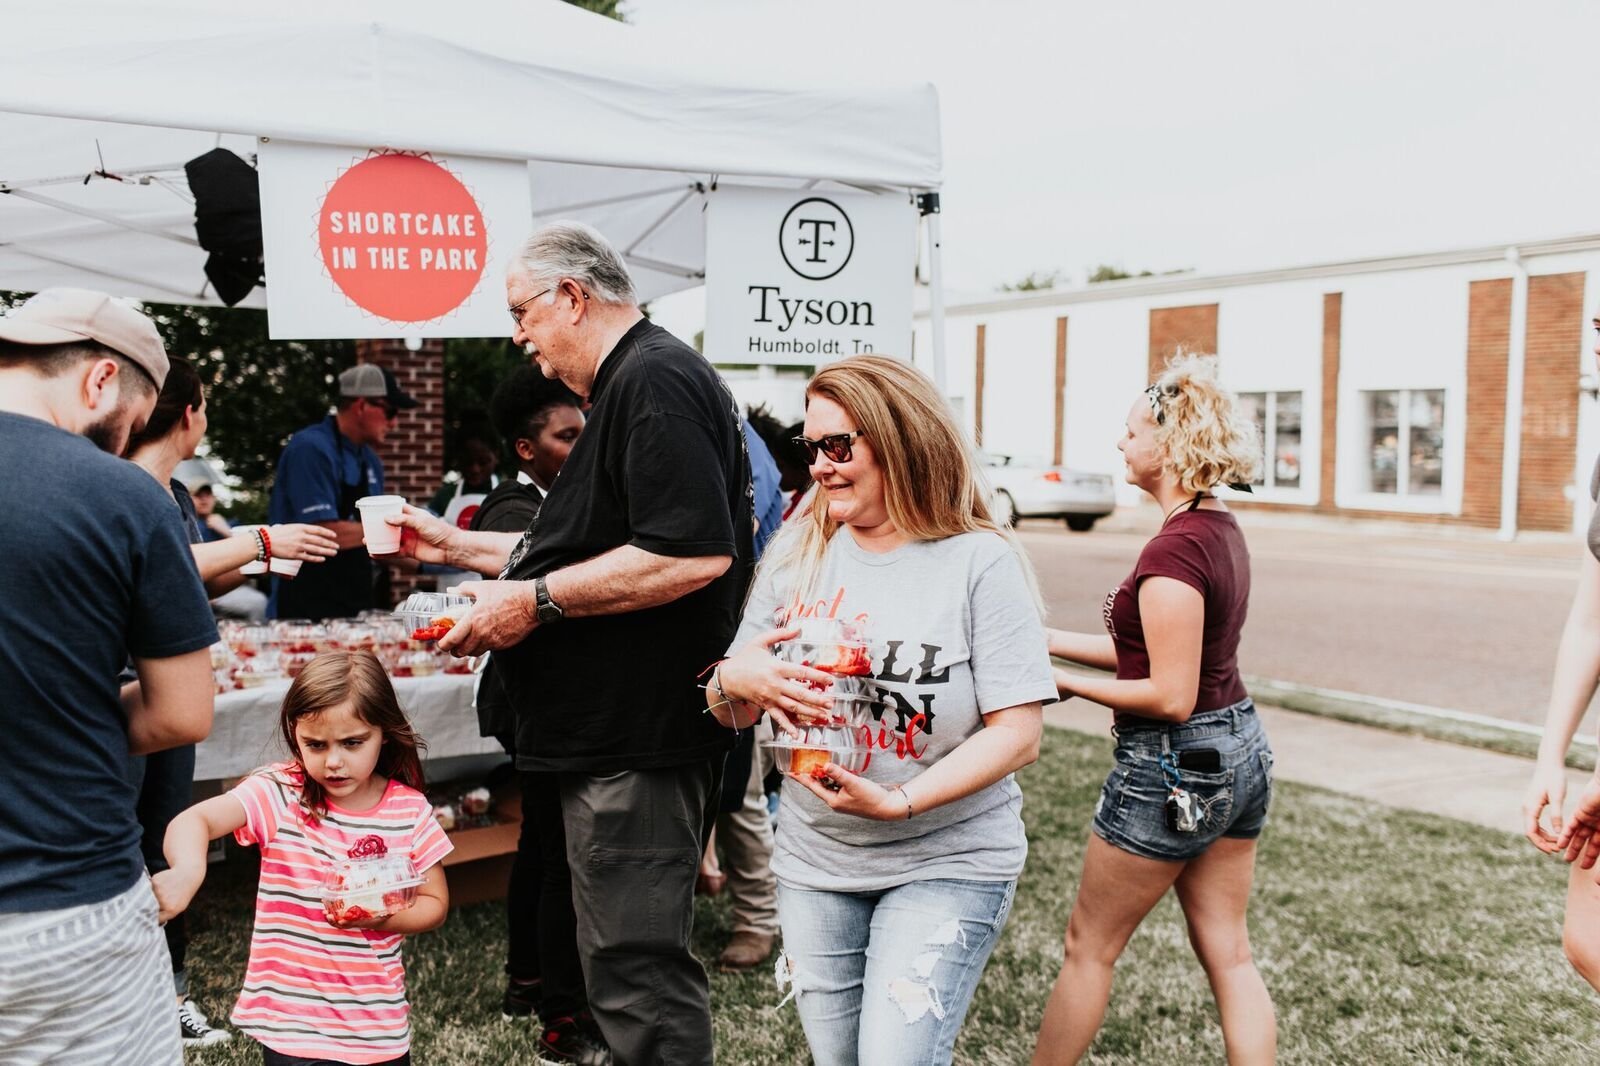 2019 West Tennessee Strawberry Festival - Shortcake in the park - 57